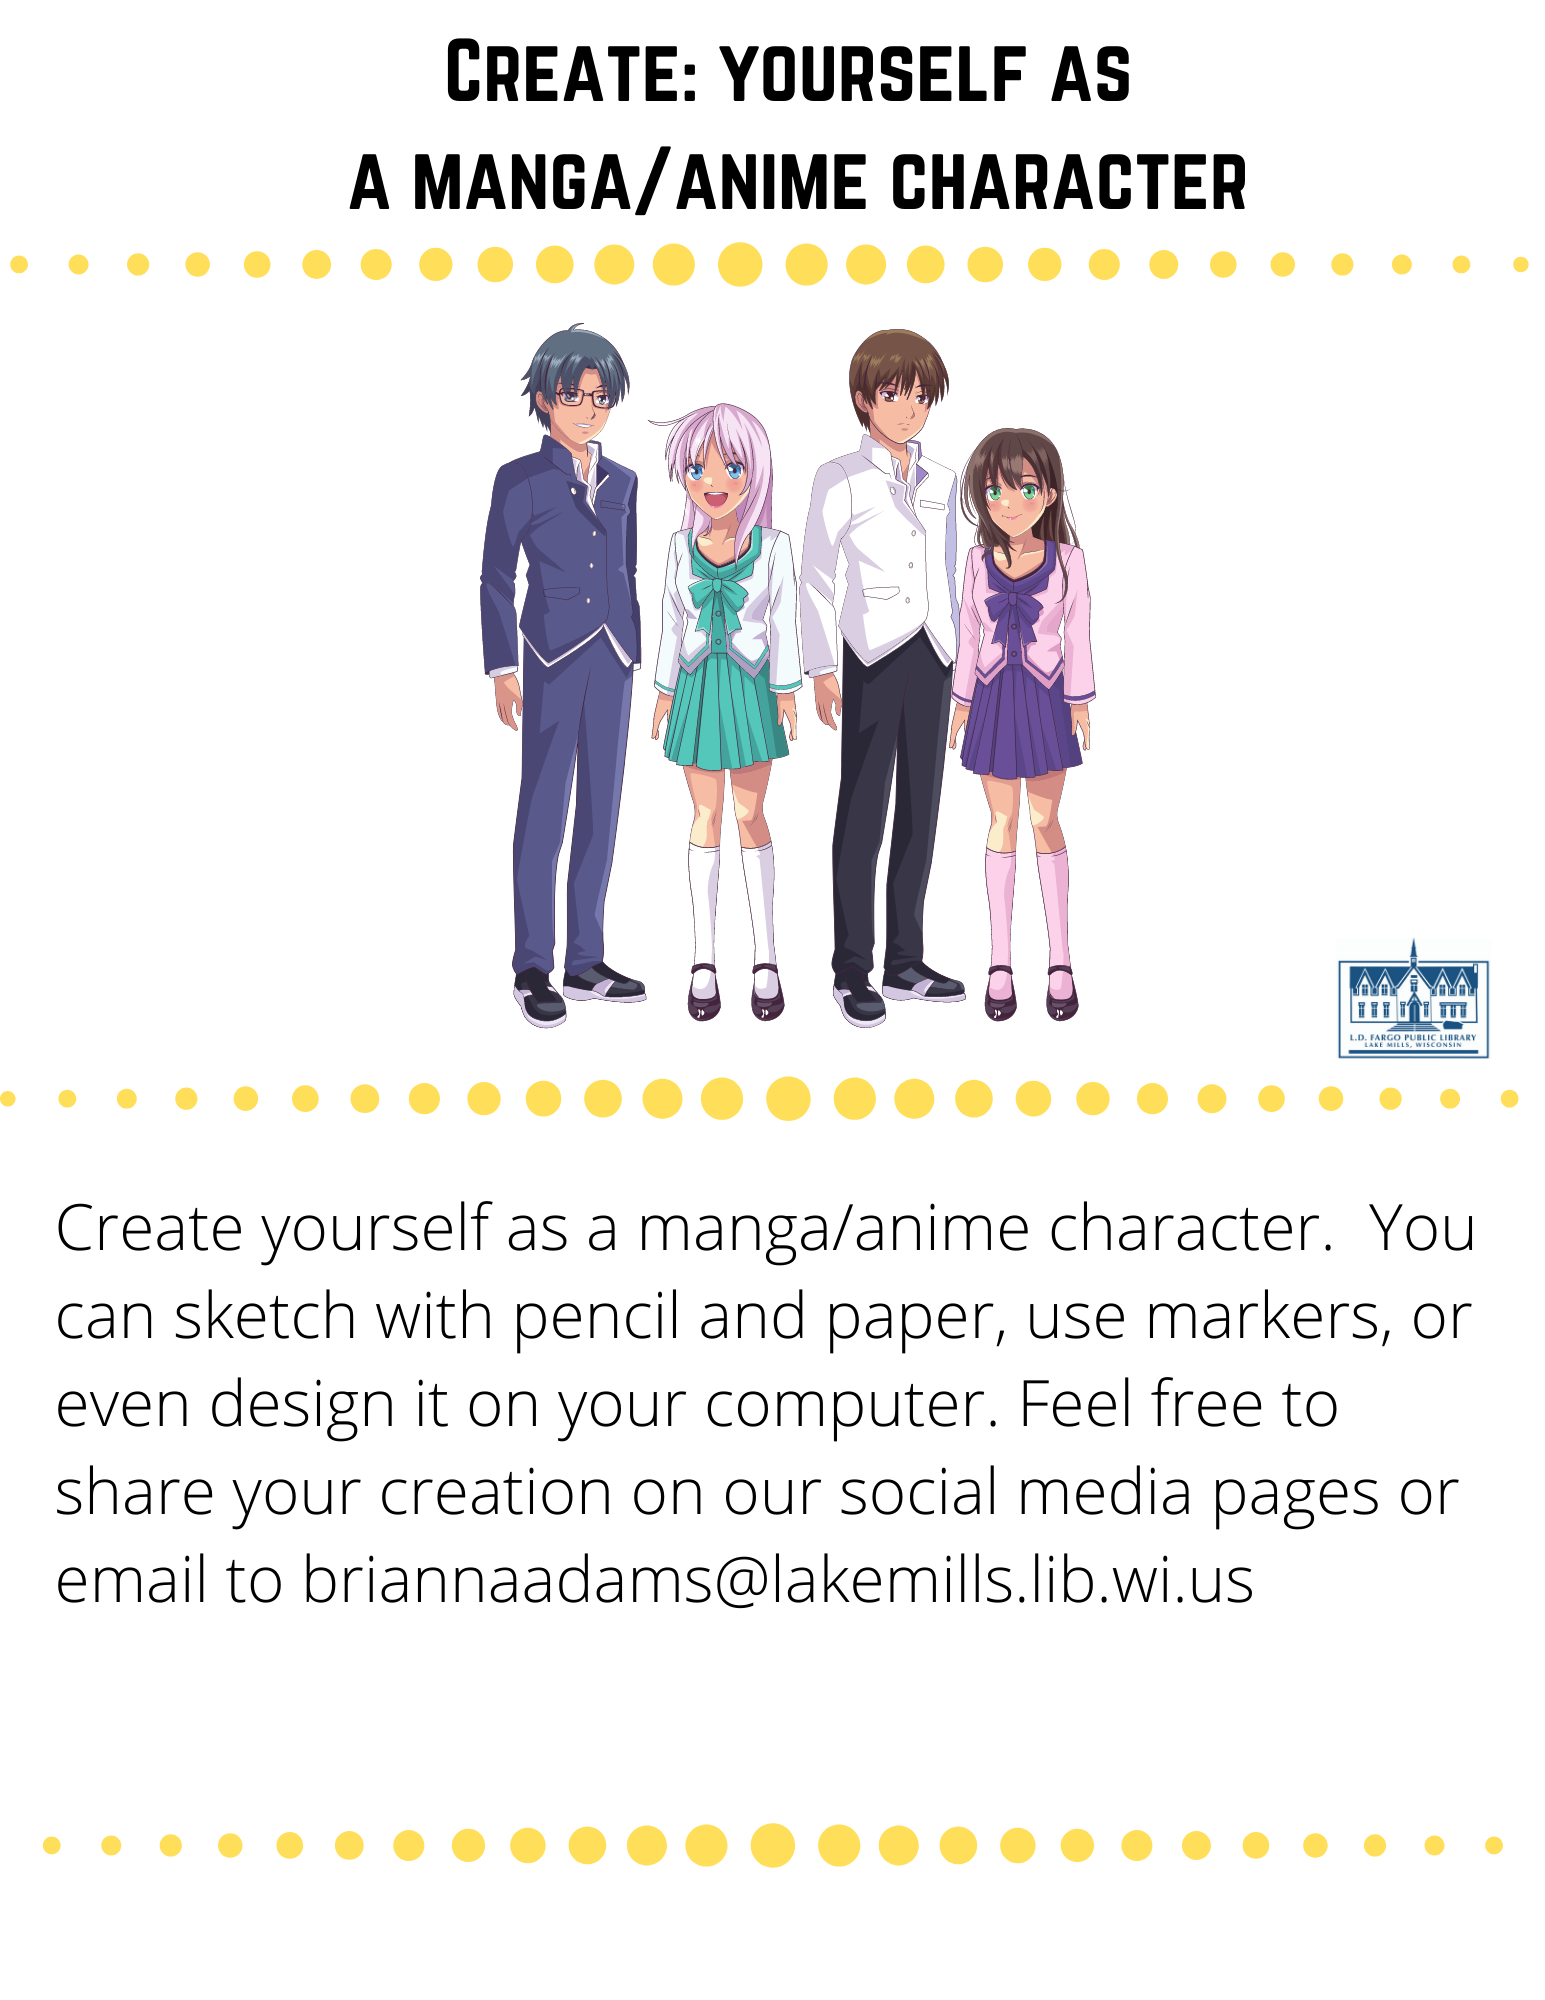 Create: yourself as  a manga/anime character  Create yourself as a manga/anime character.  You can sketch with pencil and paper, use markers, or even design it on your computer. Feel free to share your creation on our social media pages or email to briannaadams@lakemills.lib.wi.us 